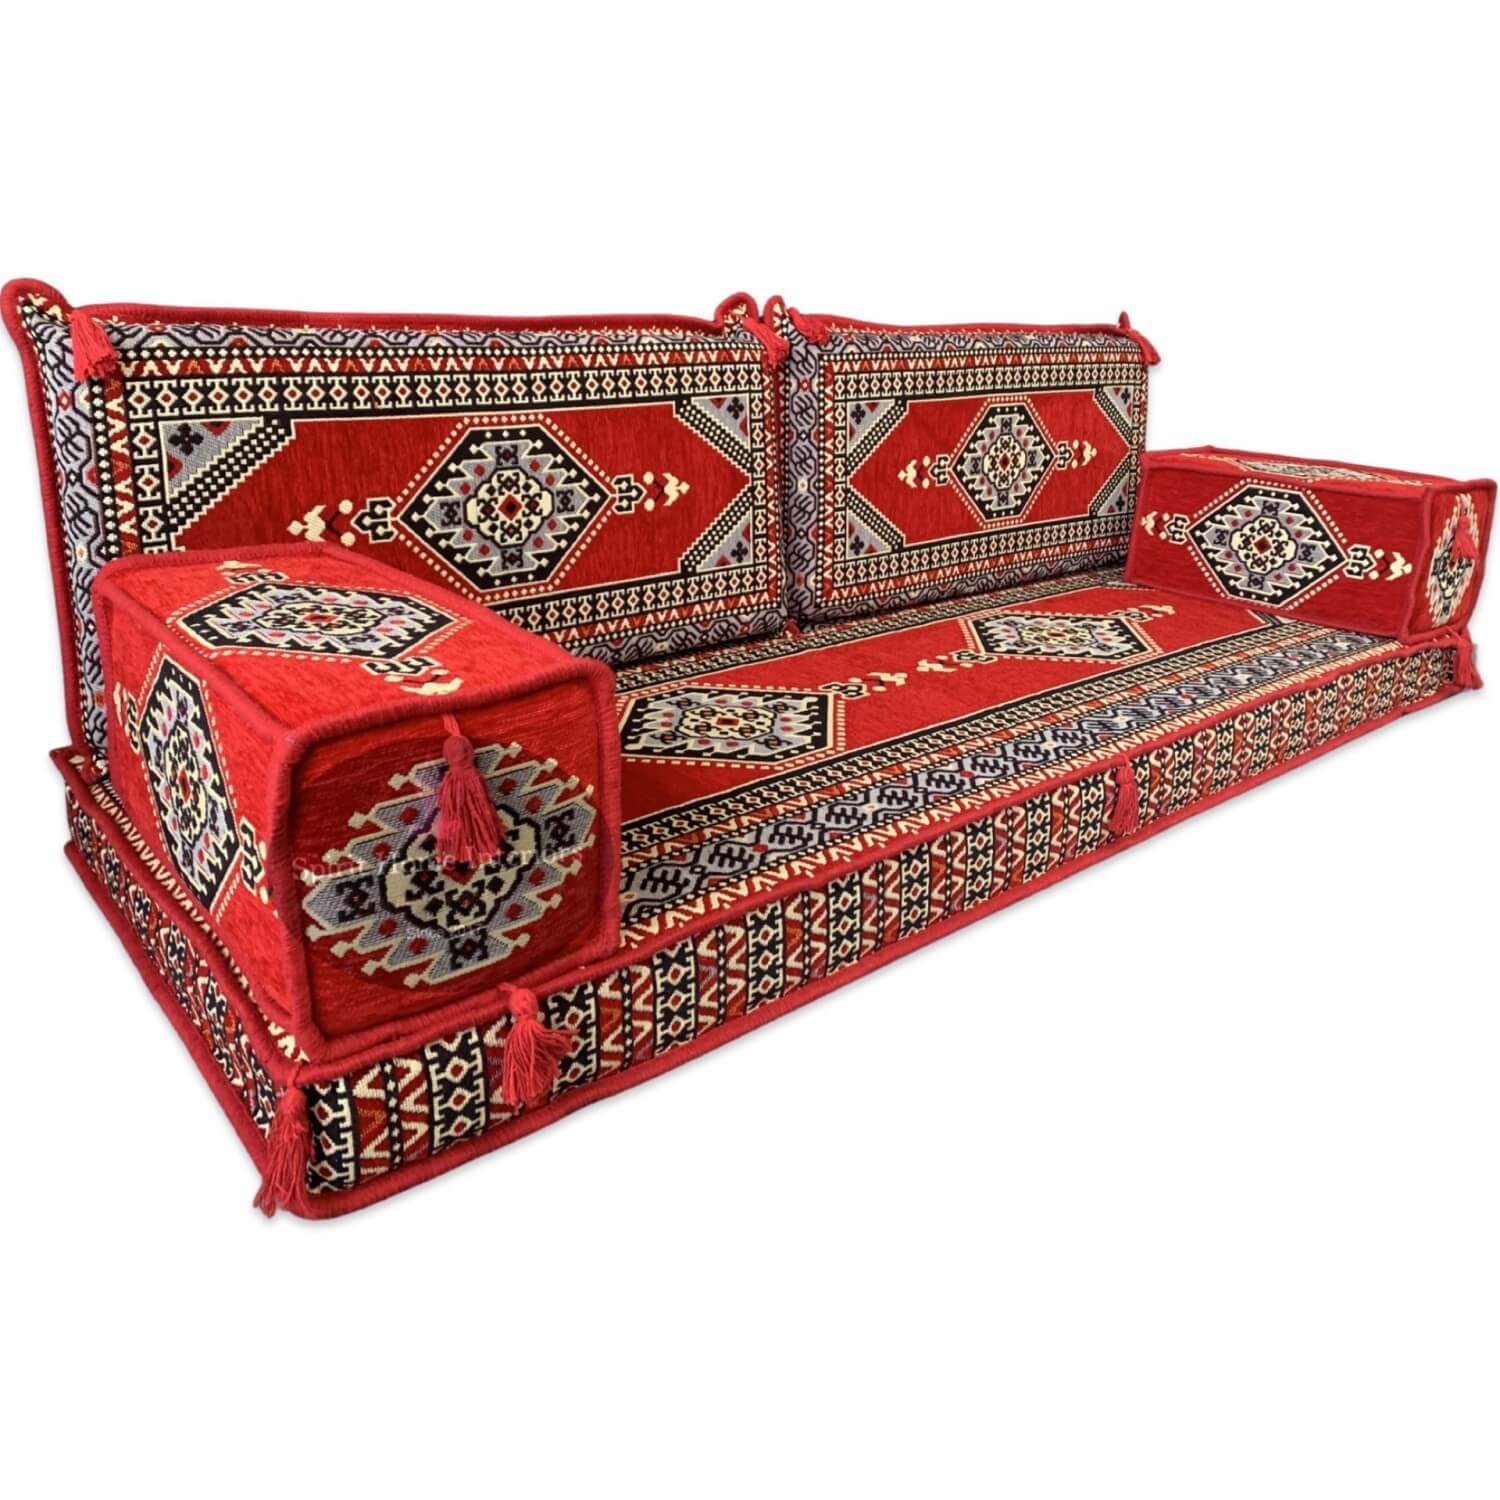 Palace Red Three Seater Majlis Floor Sofa Couch